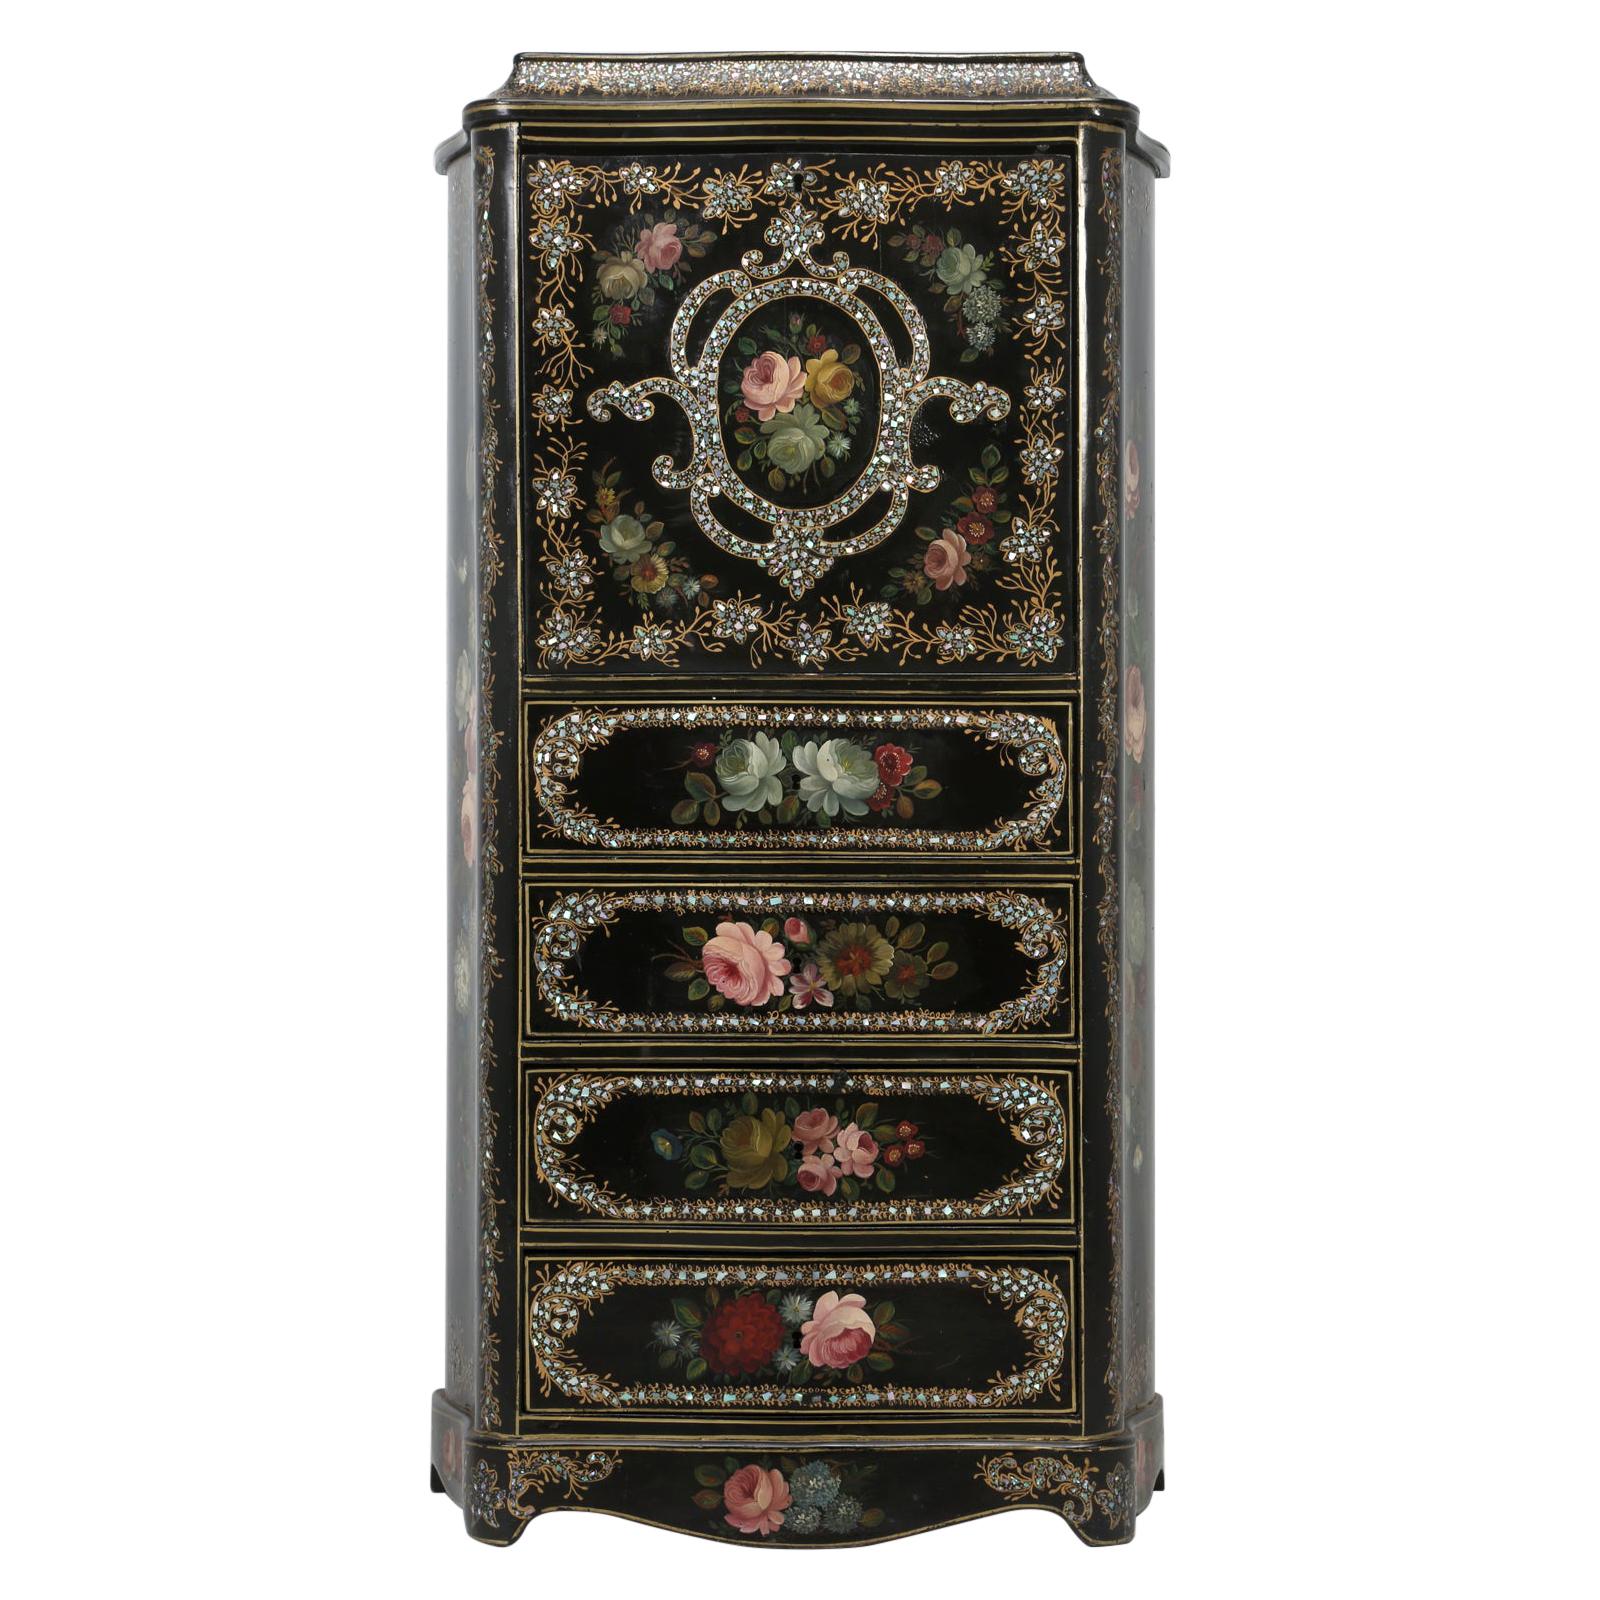 Napoleon III Antique French Secretary in Black Lacquer and Mother of Pearl Inlay